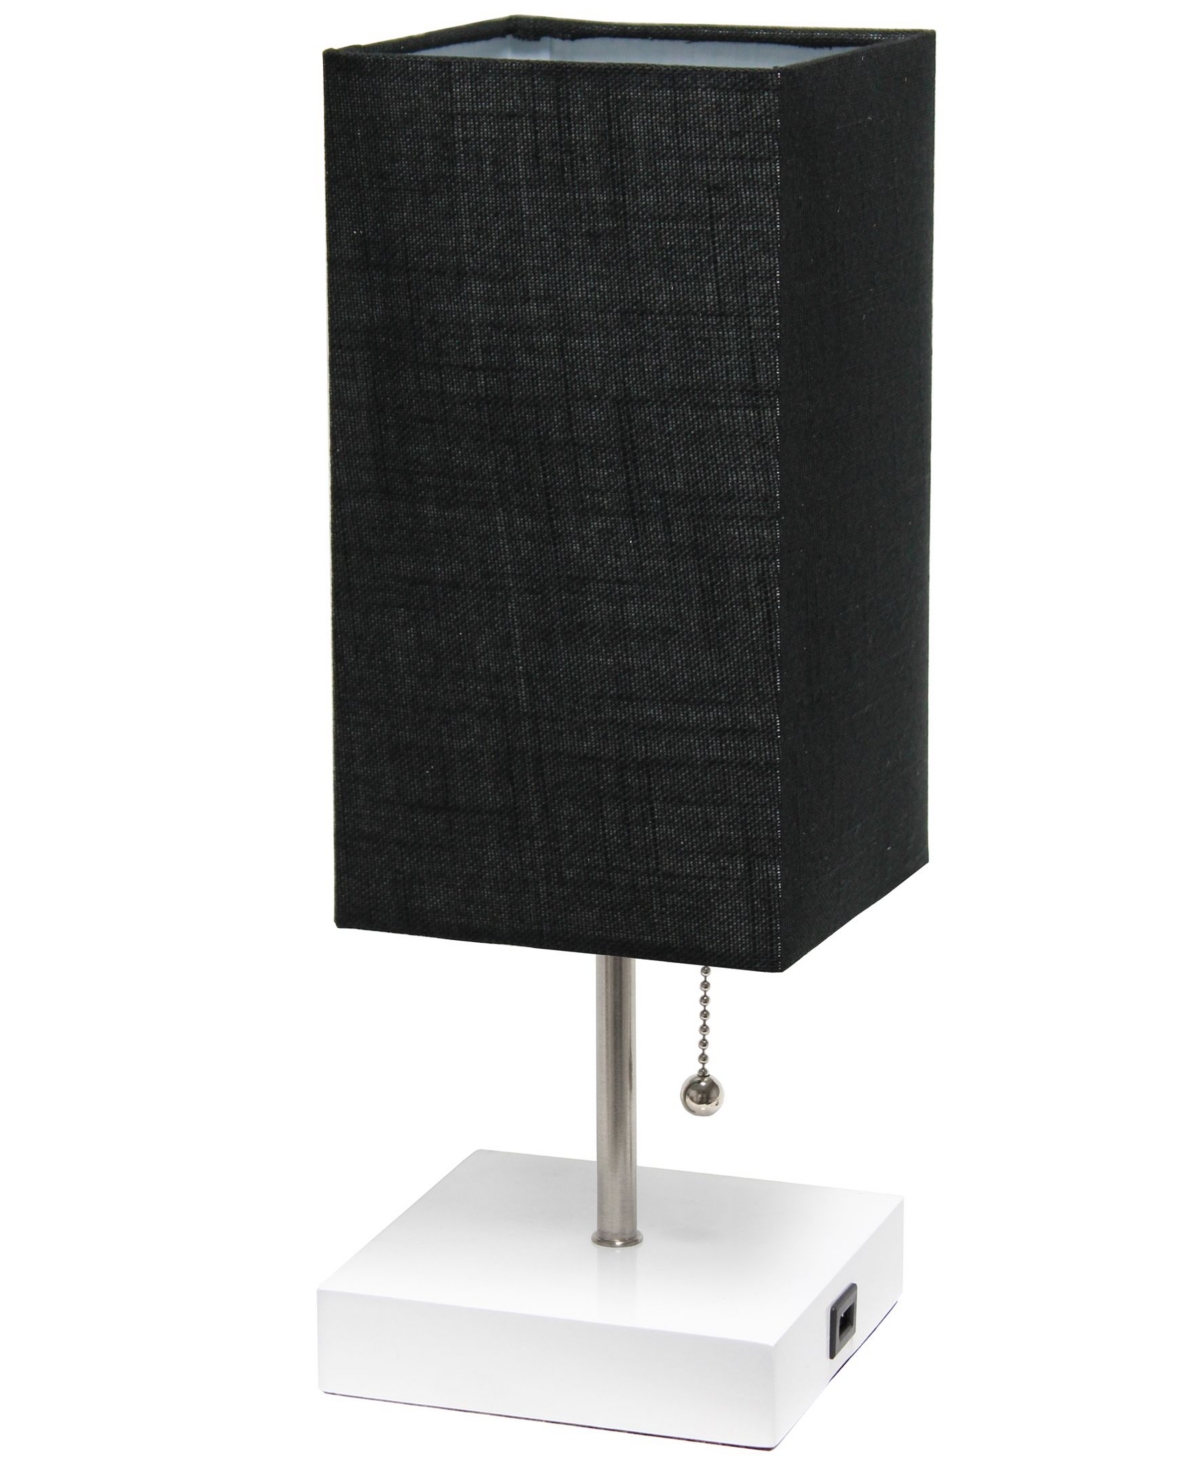 Simple Designs Petite Stick Lamp With Usb Charging Port And Shade In Black Shade,white Base